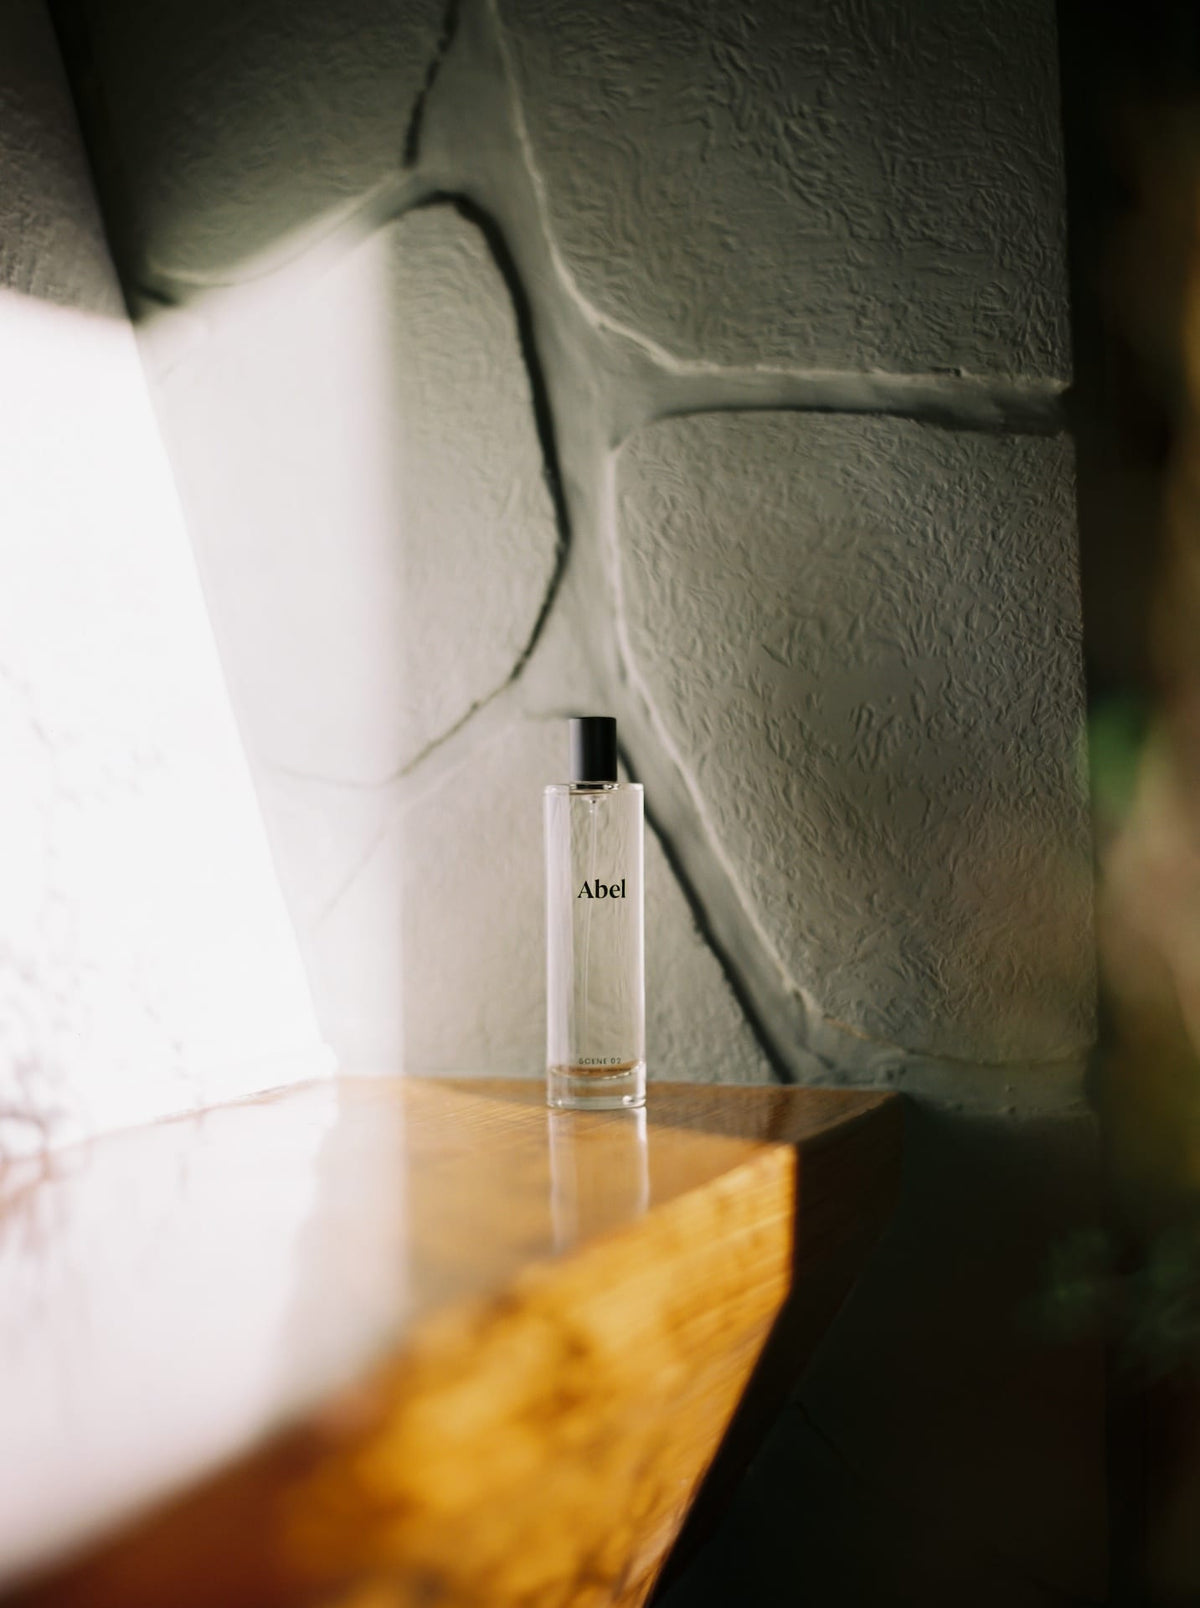 Clear Abel Room Spray bottle on wooden surface with textured wall background and soft lighting.